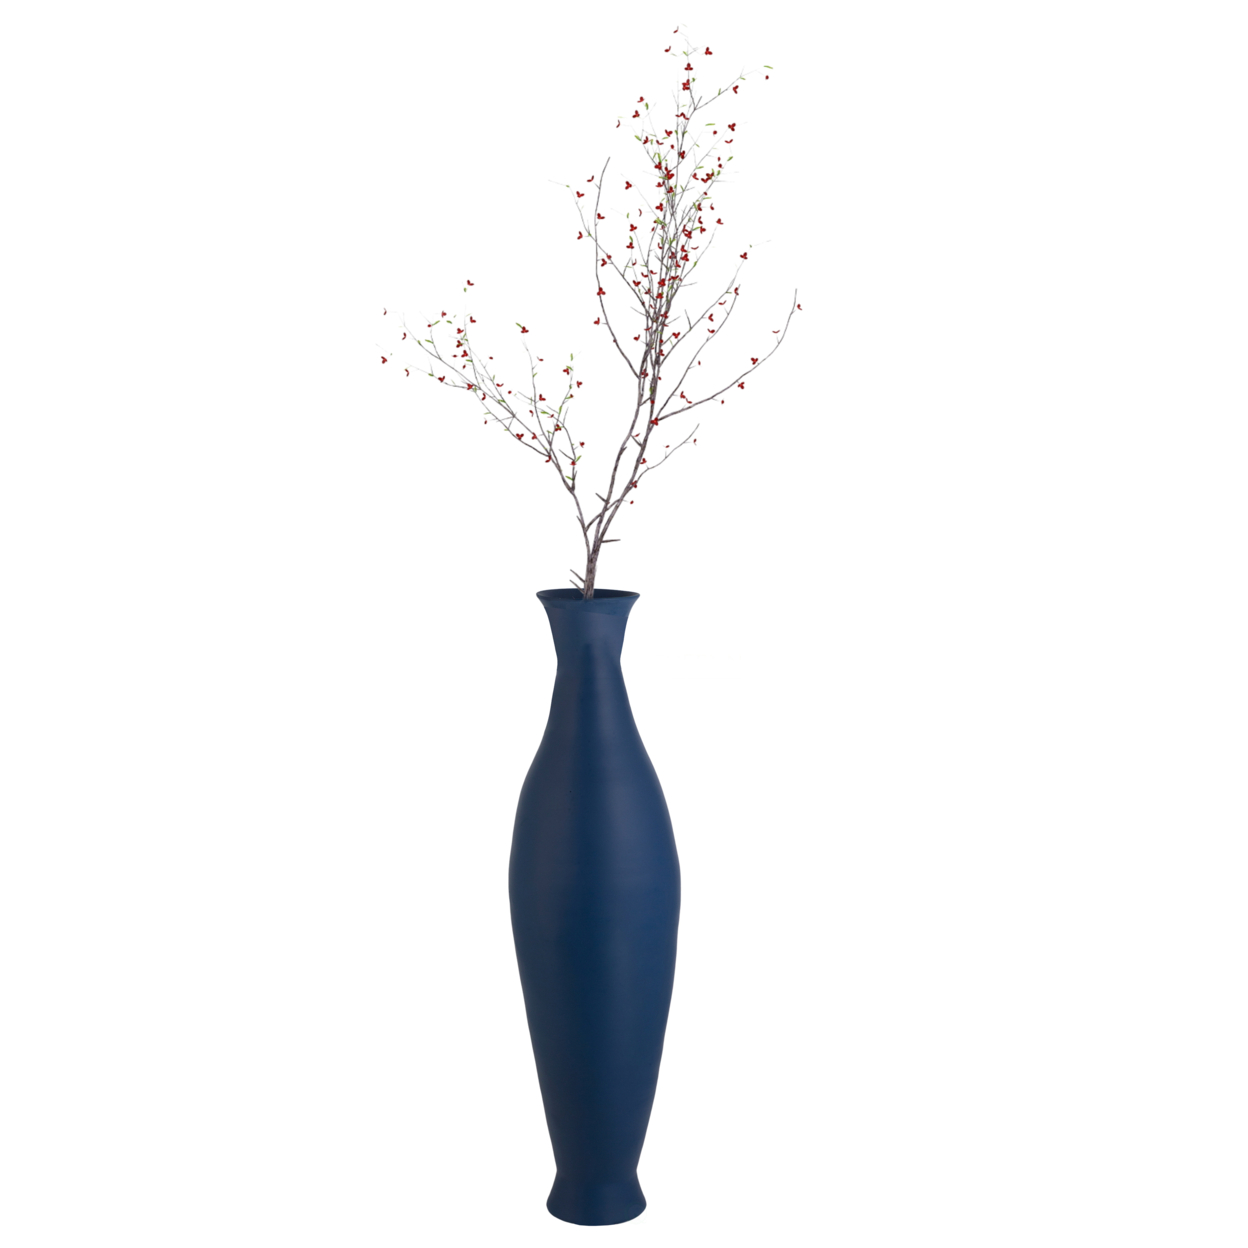 Modern Decorative Bamboo Floor Flower Vase For Living Room, Entryway Or Dining, Fill Up With Dried Branches Or Flowers, 43 Inch - Blue